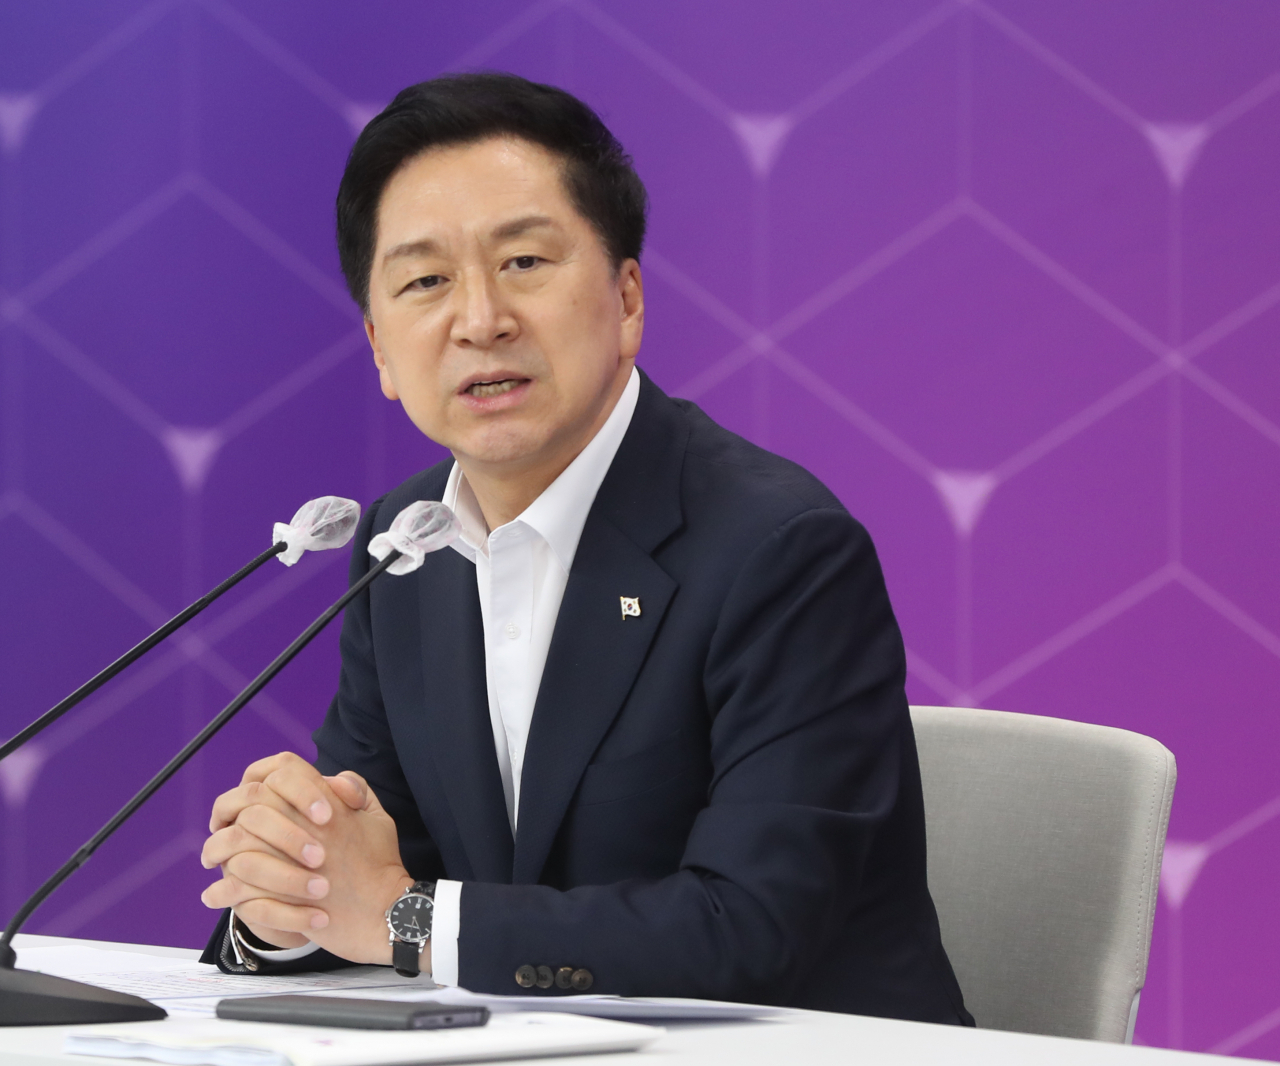 Rep. Kim Gi-hyeon, leader of the ruling People Power Party, is seen answering questions from reporters at a meeting held in the southeastern port city of Ulsan last Wednesday. (Yonhap)